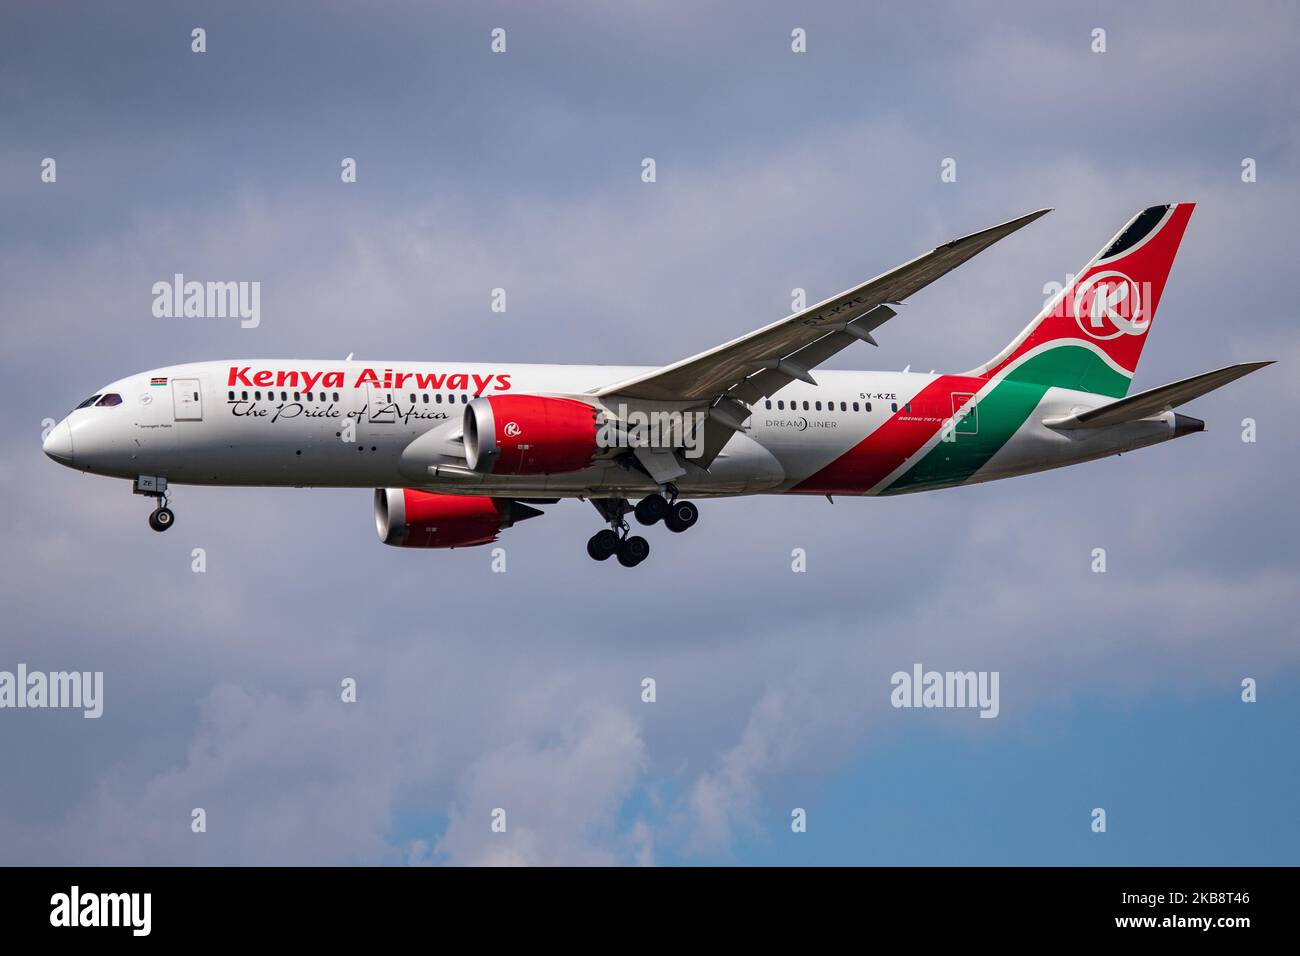 Kenya Airways Boeing 787-8 Dreamliner aircraft as seen on final approach landing at London Heathrow International Airport LHR EGLL in England, UK on 20 October 2019. The B787 airplane has the registration 5Y-KZE, 2x GEnx-1B jet engines and the name Serengeti Plains. The airline connects the British capital to Jomo Kenyatta International Airport NBO HKJK in Nairobi. Kenya Airways KQ KQA is the flag carrier of Kenya and member of SkyTeam aviation alliance. (Photo by Nicolas Economou/NurPhoto) Stock Photo